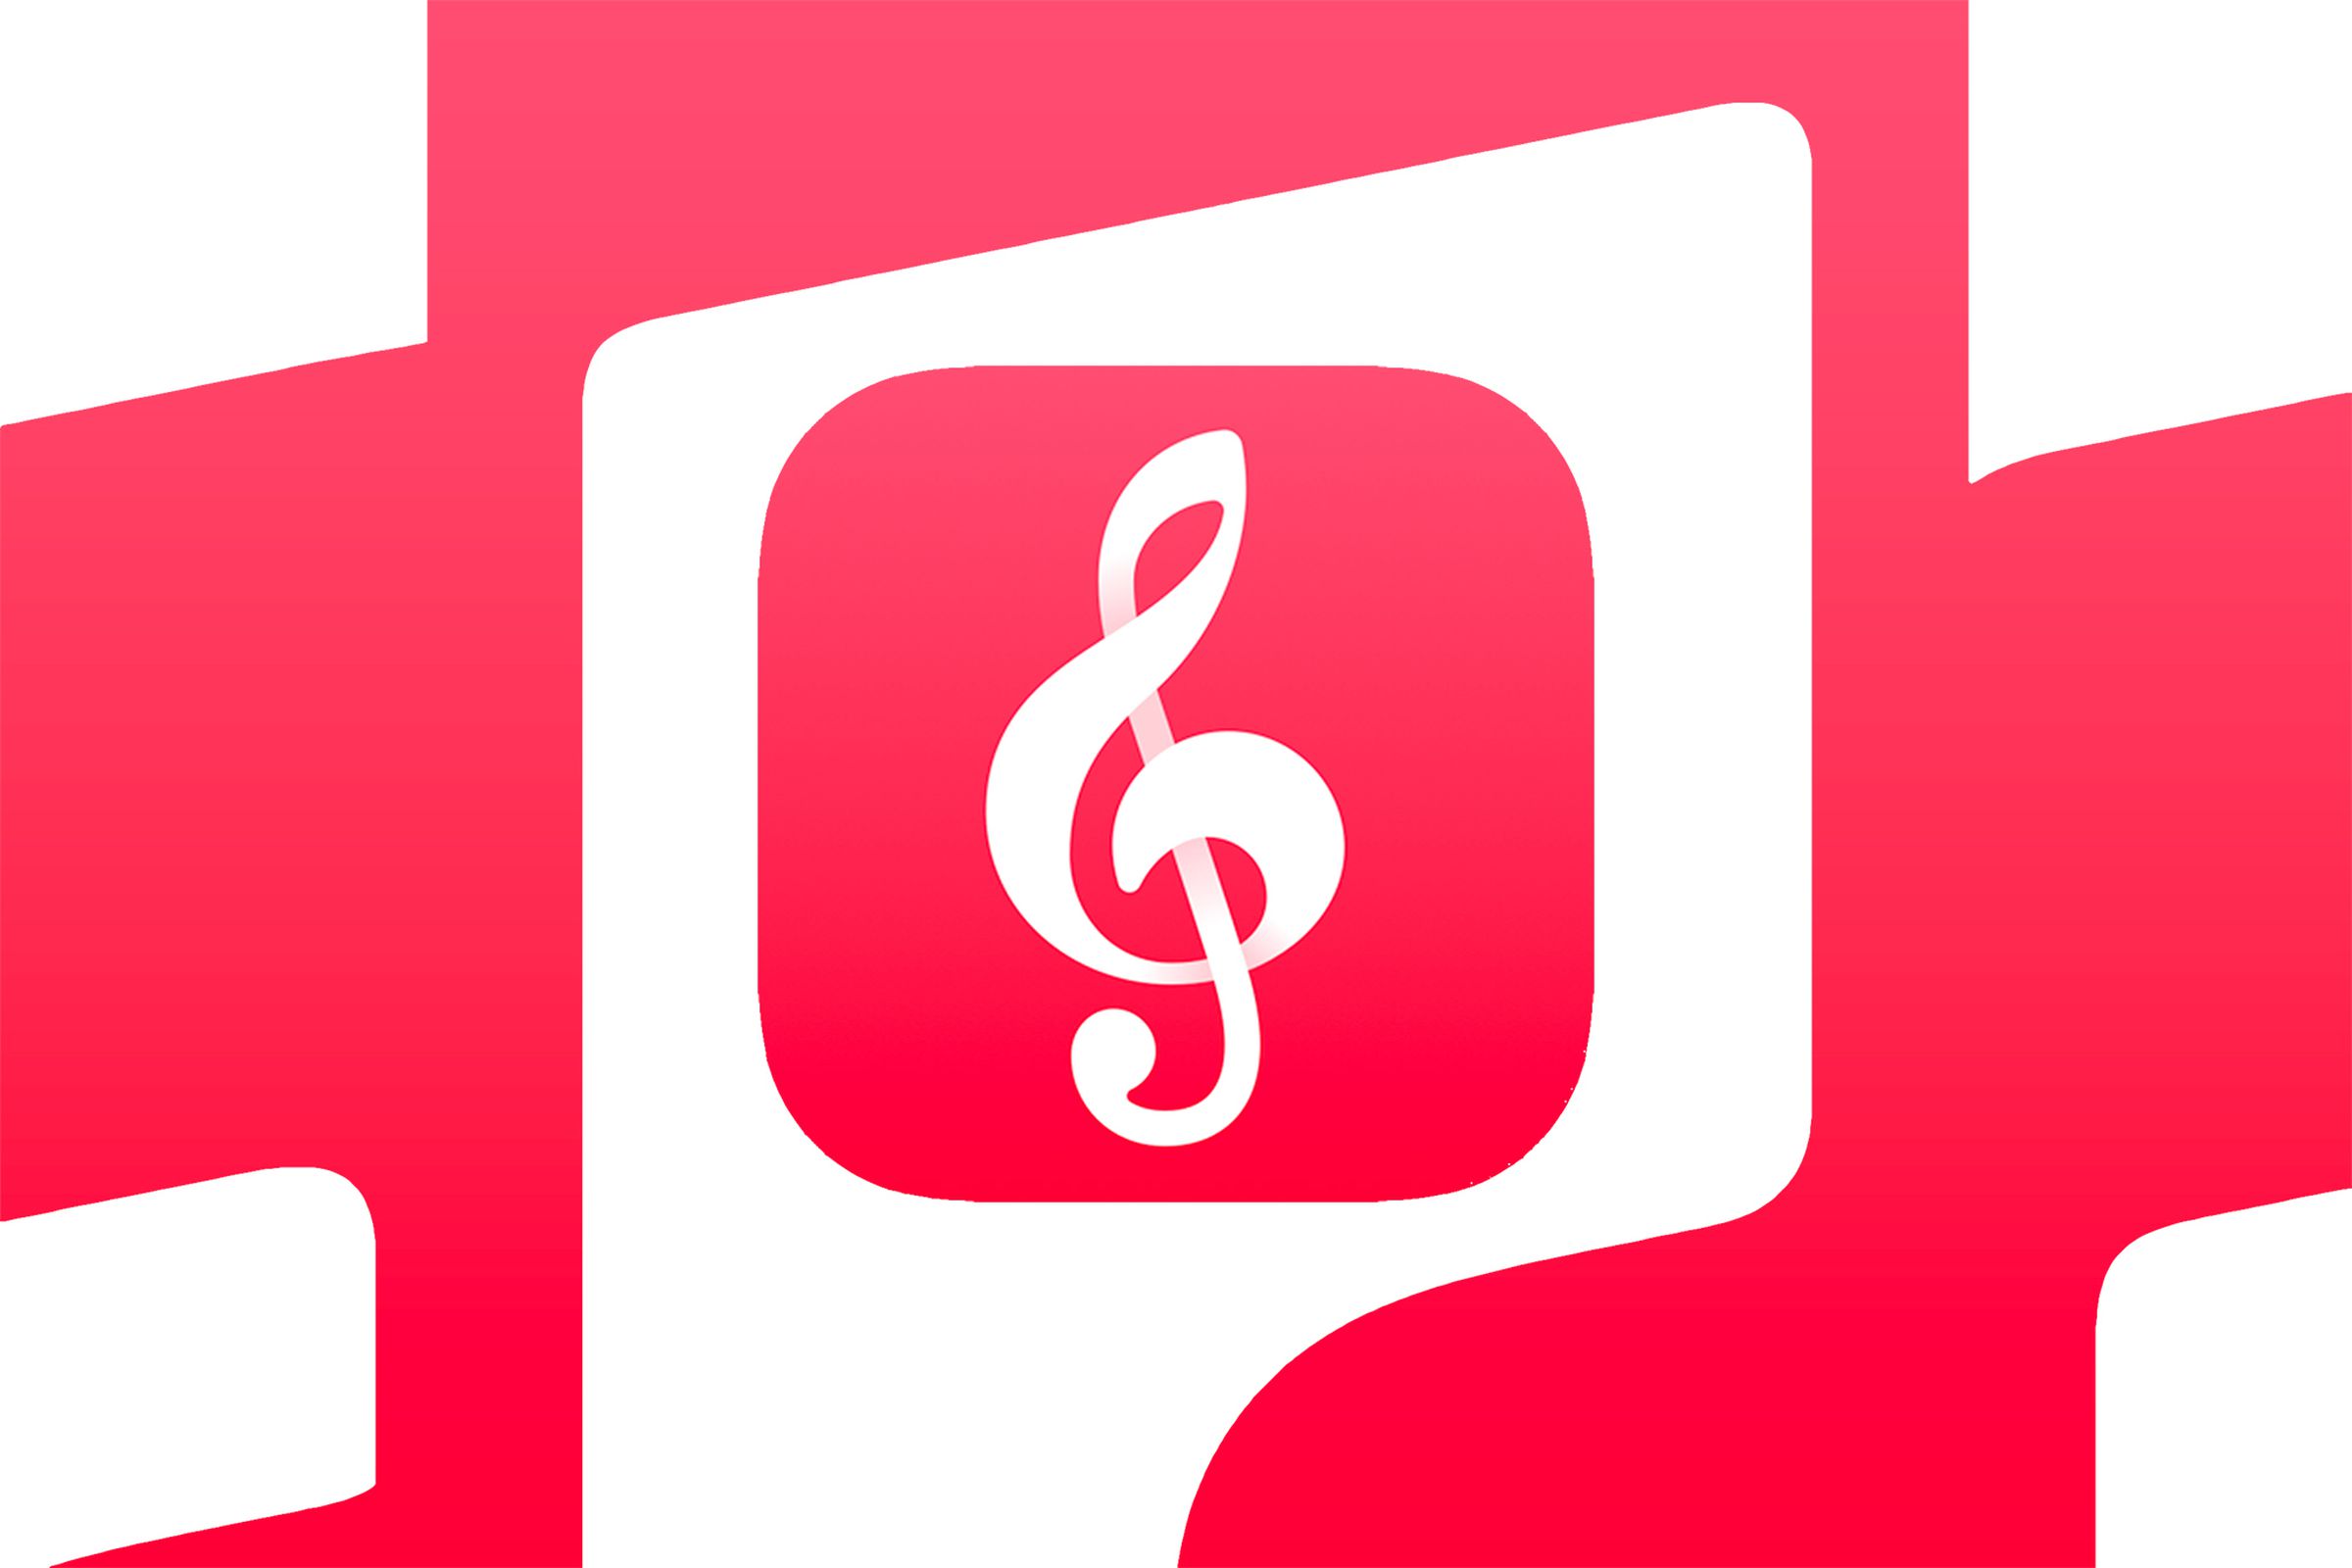 And image of the Apple Music Classical app on a red and white background.